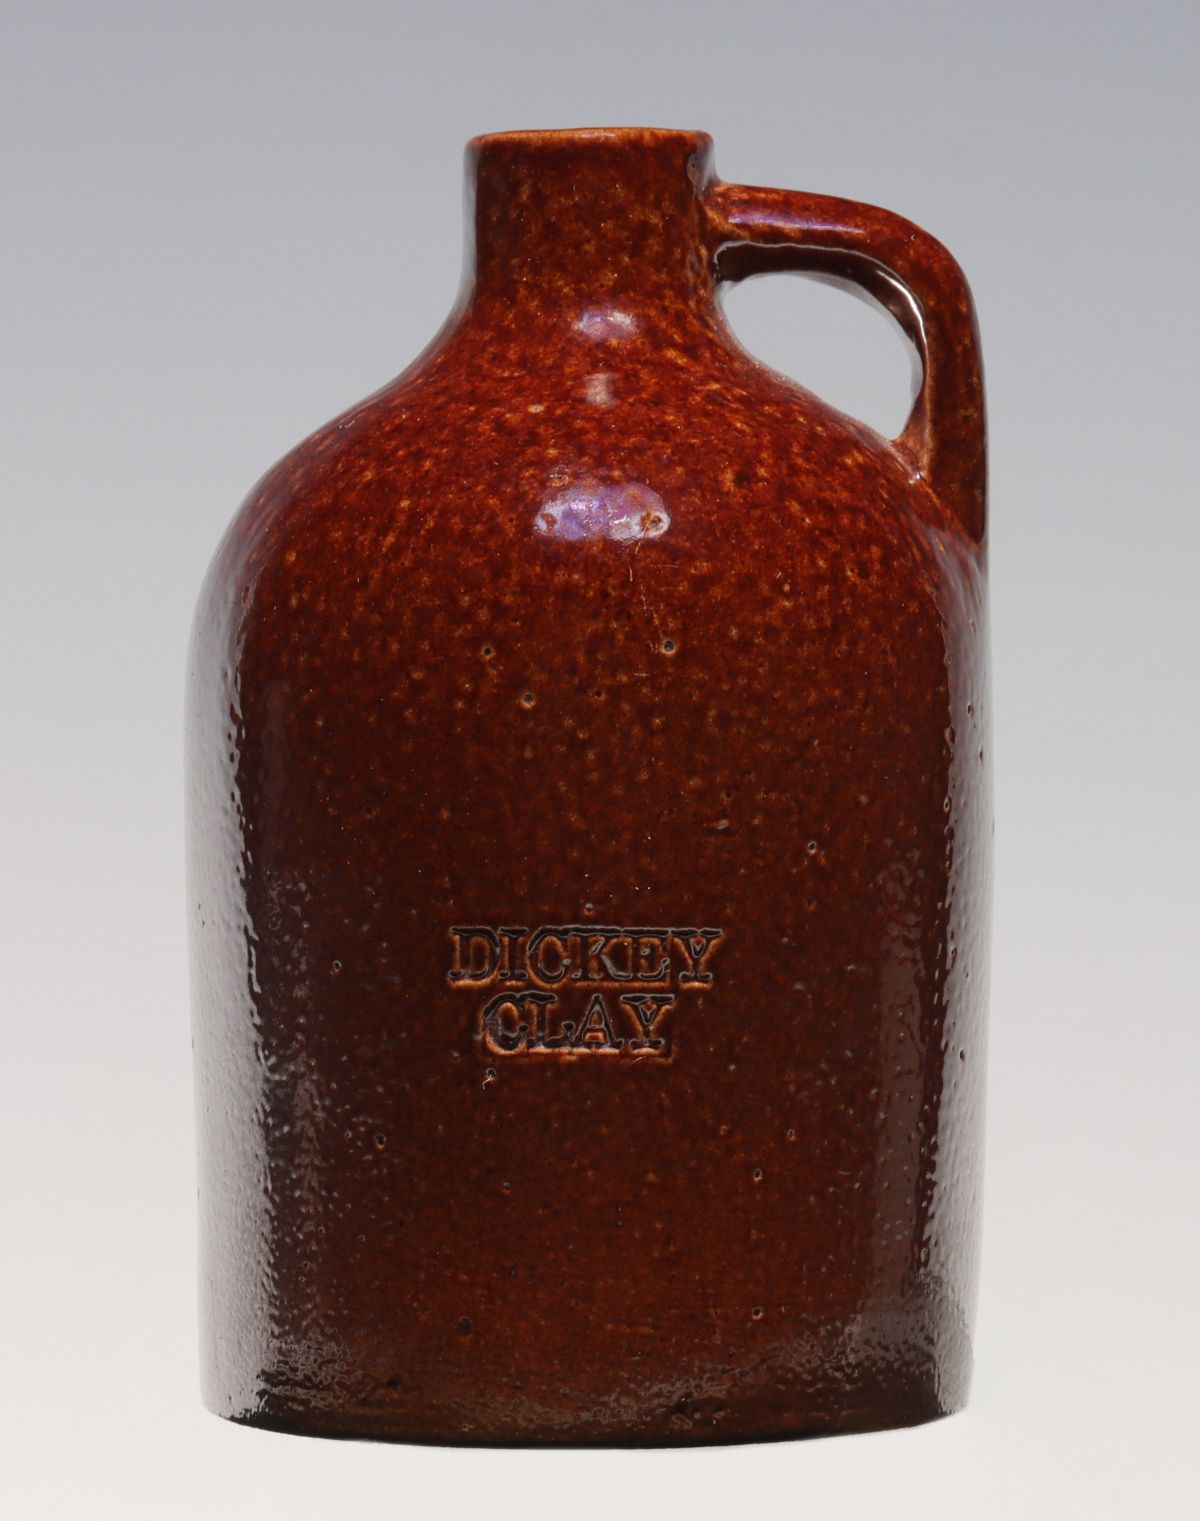 A DICKEY CLAY SEWER TILE TYPE CLAY AND GLAZE MINI JUG